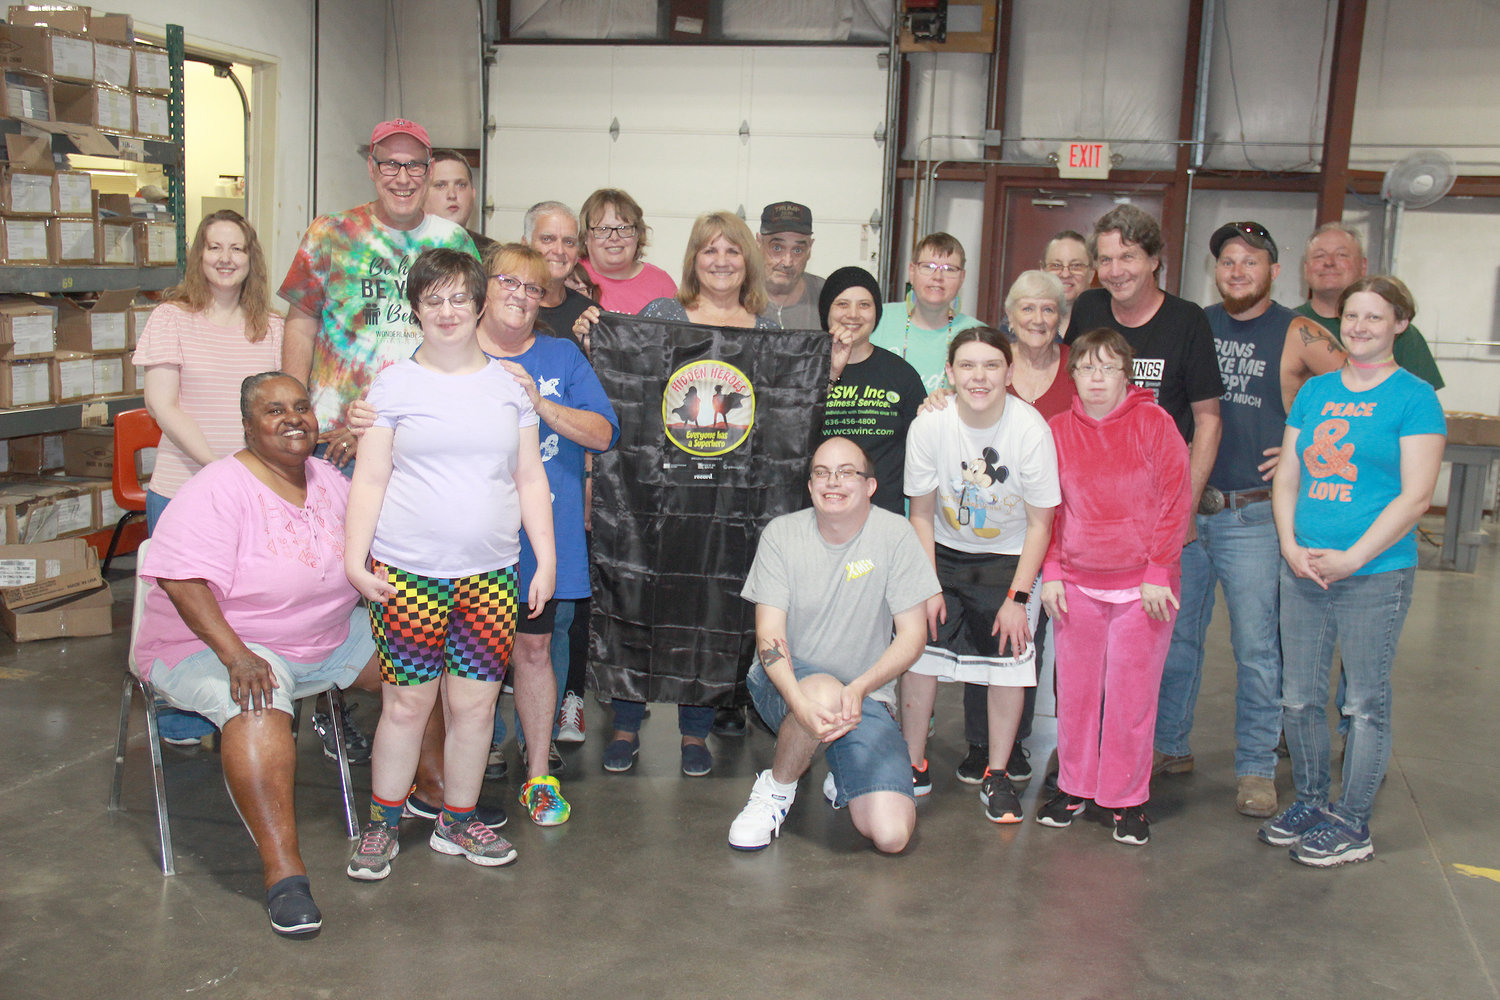 HIDDEN HERO — Warren County Sheltered Workshop Executive Director Jami Washburn displays her superhero cape alongside employees at the facility. Washburn was recognized for her work at the not-for-profit organization that provides employment for people with disabilities, as well as in the community.